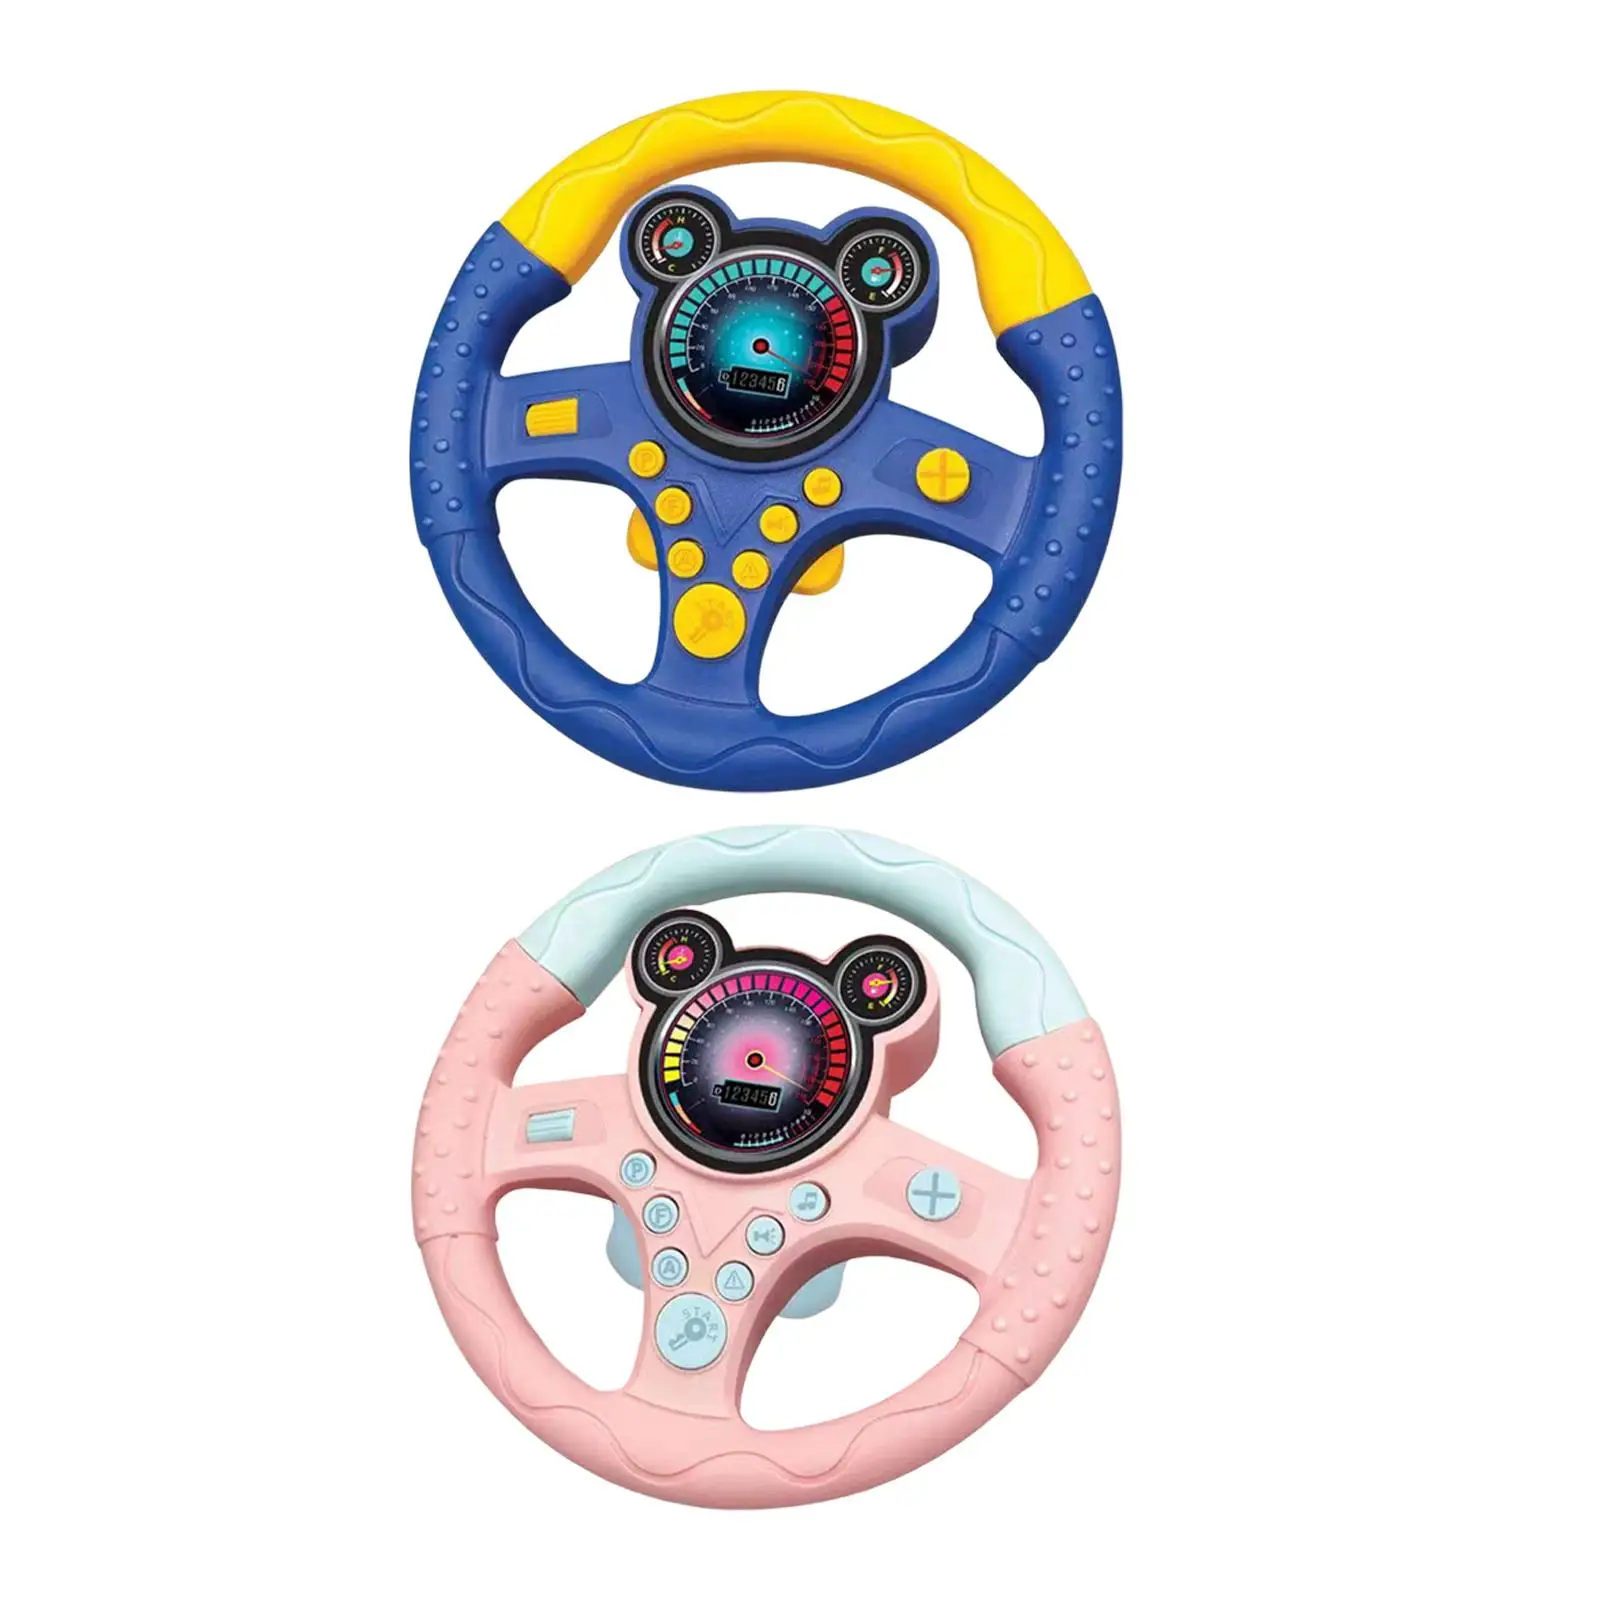 Simulated Steering Wheel Battery Powered Kids Electric Wheel Toy for Outdoor Treehouse Climbing Frame Backyard Birthday Gifts